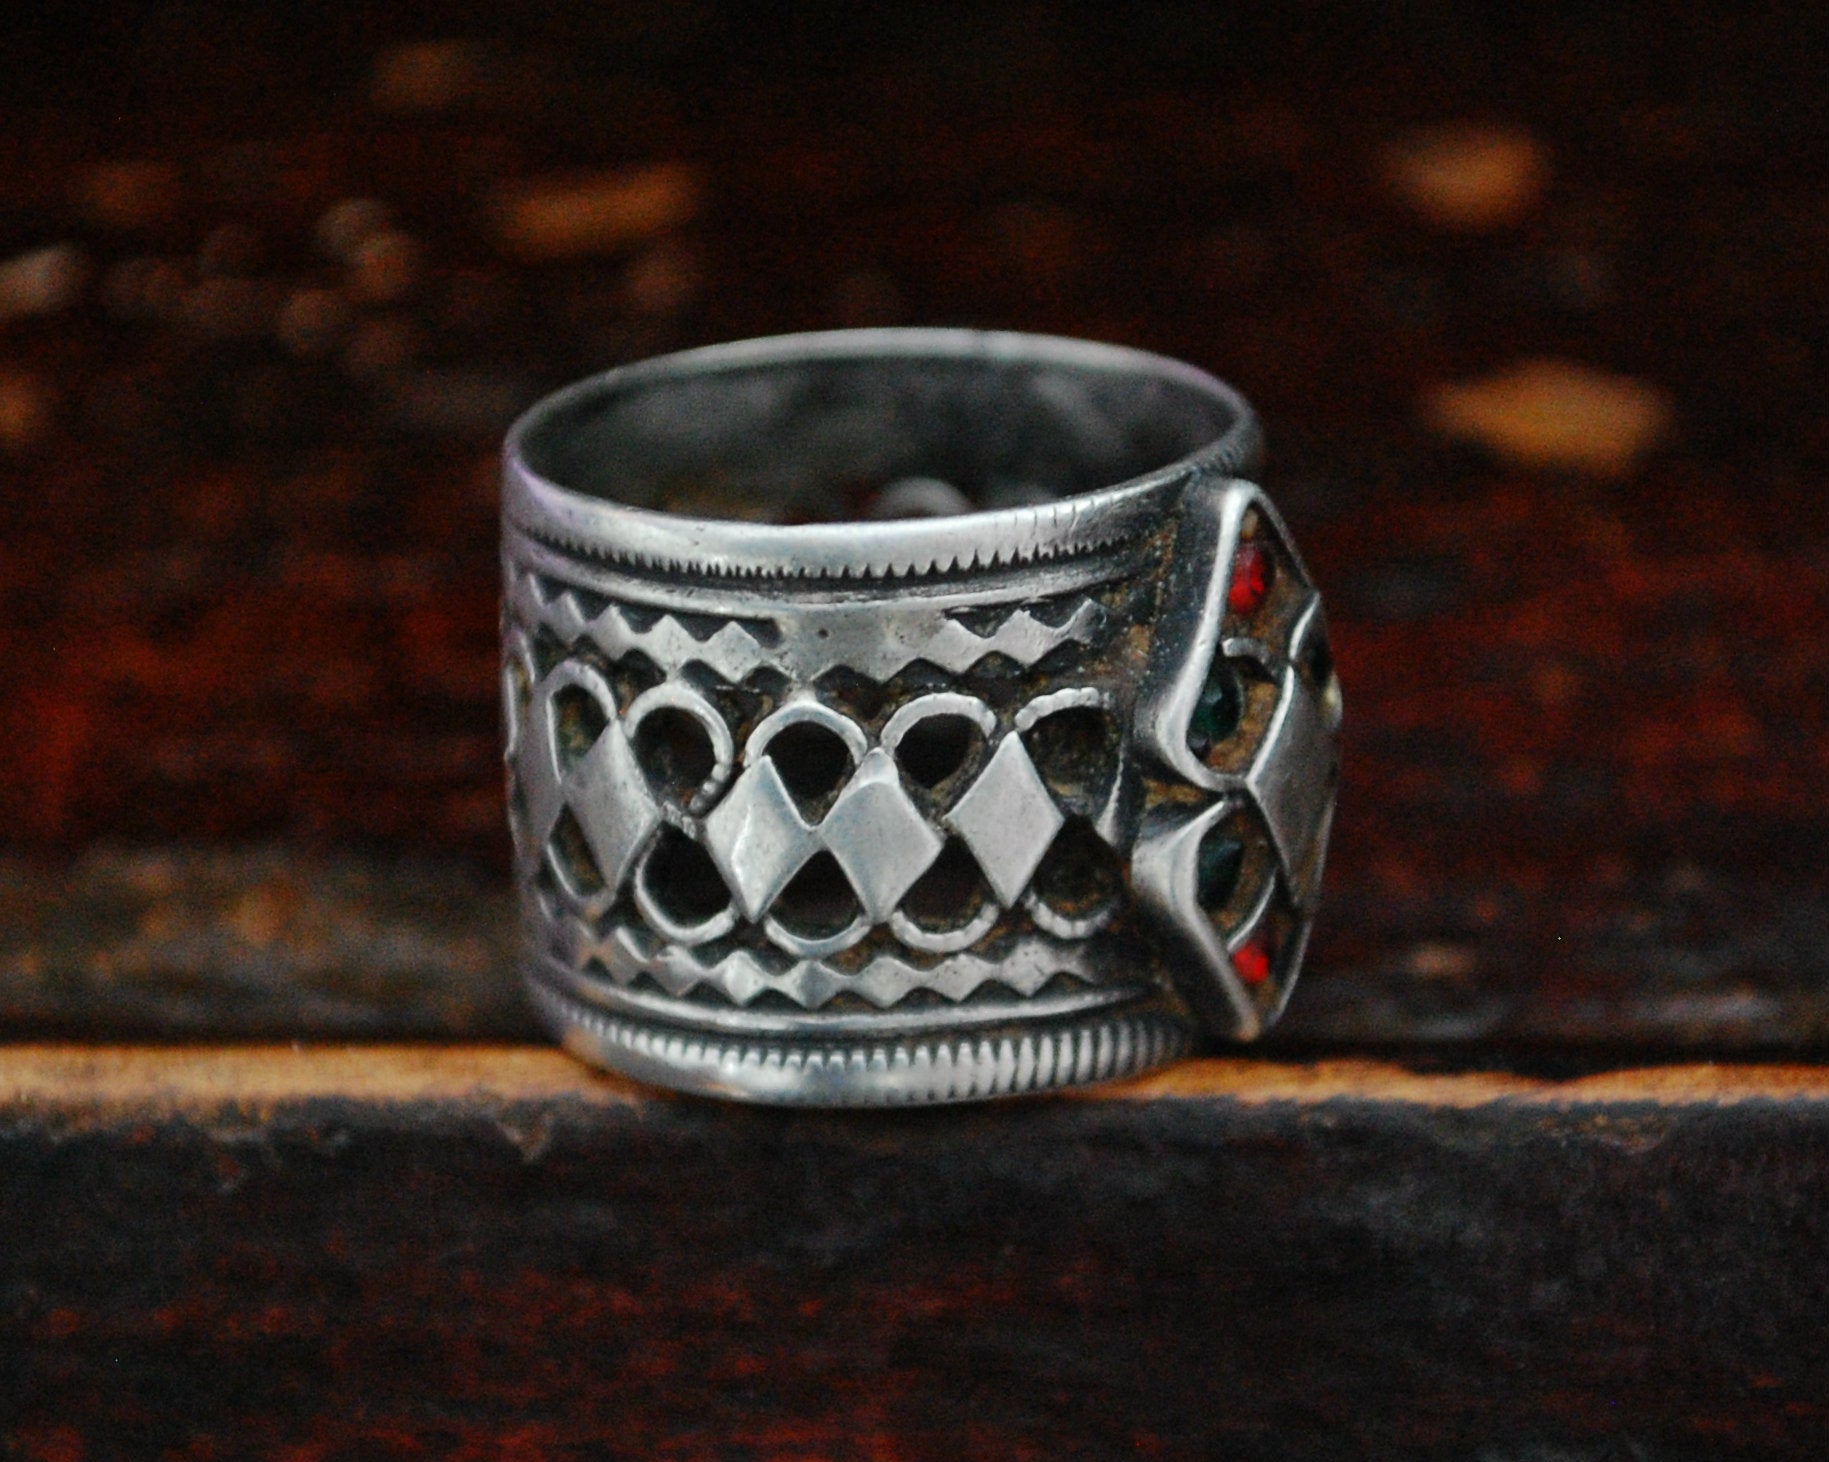 Antique Afghani Openwork Band Ring with Glass Stones - Size 7.5